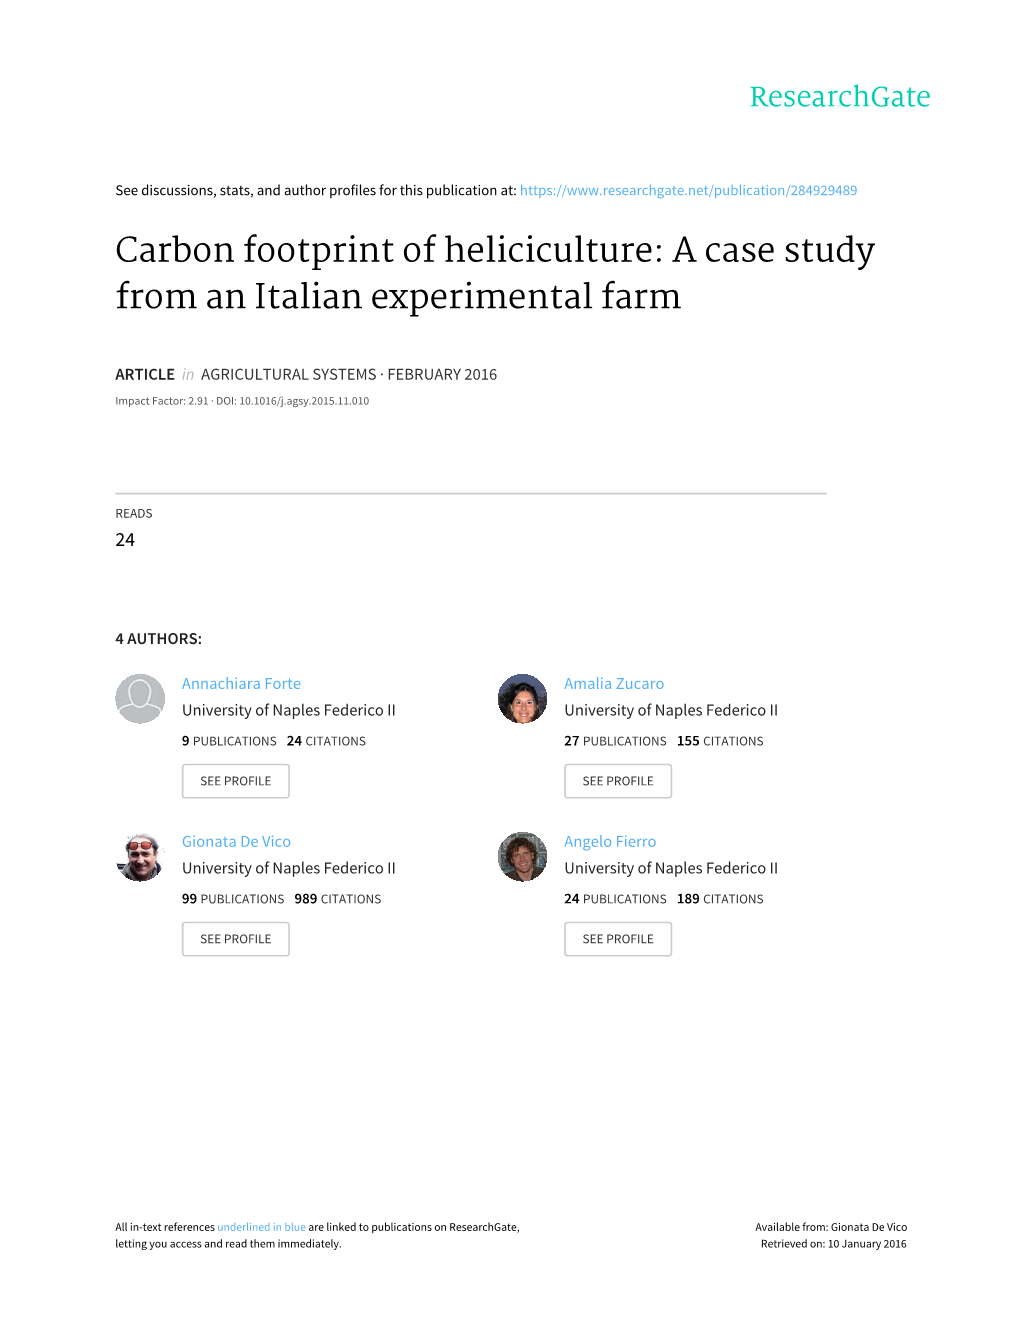 Carbon Footprint of Heliciculture: a Case Study from an Italian Experimental Farm